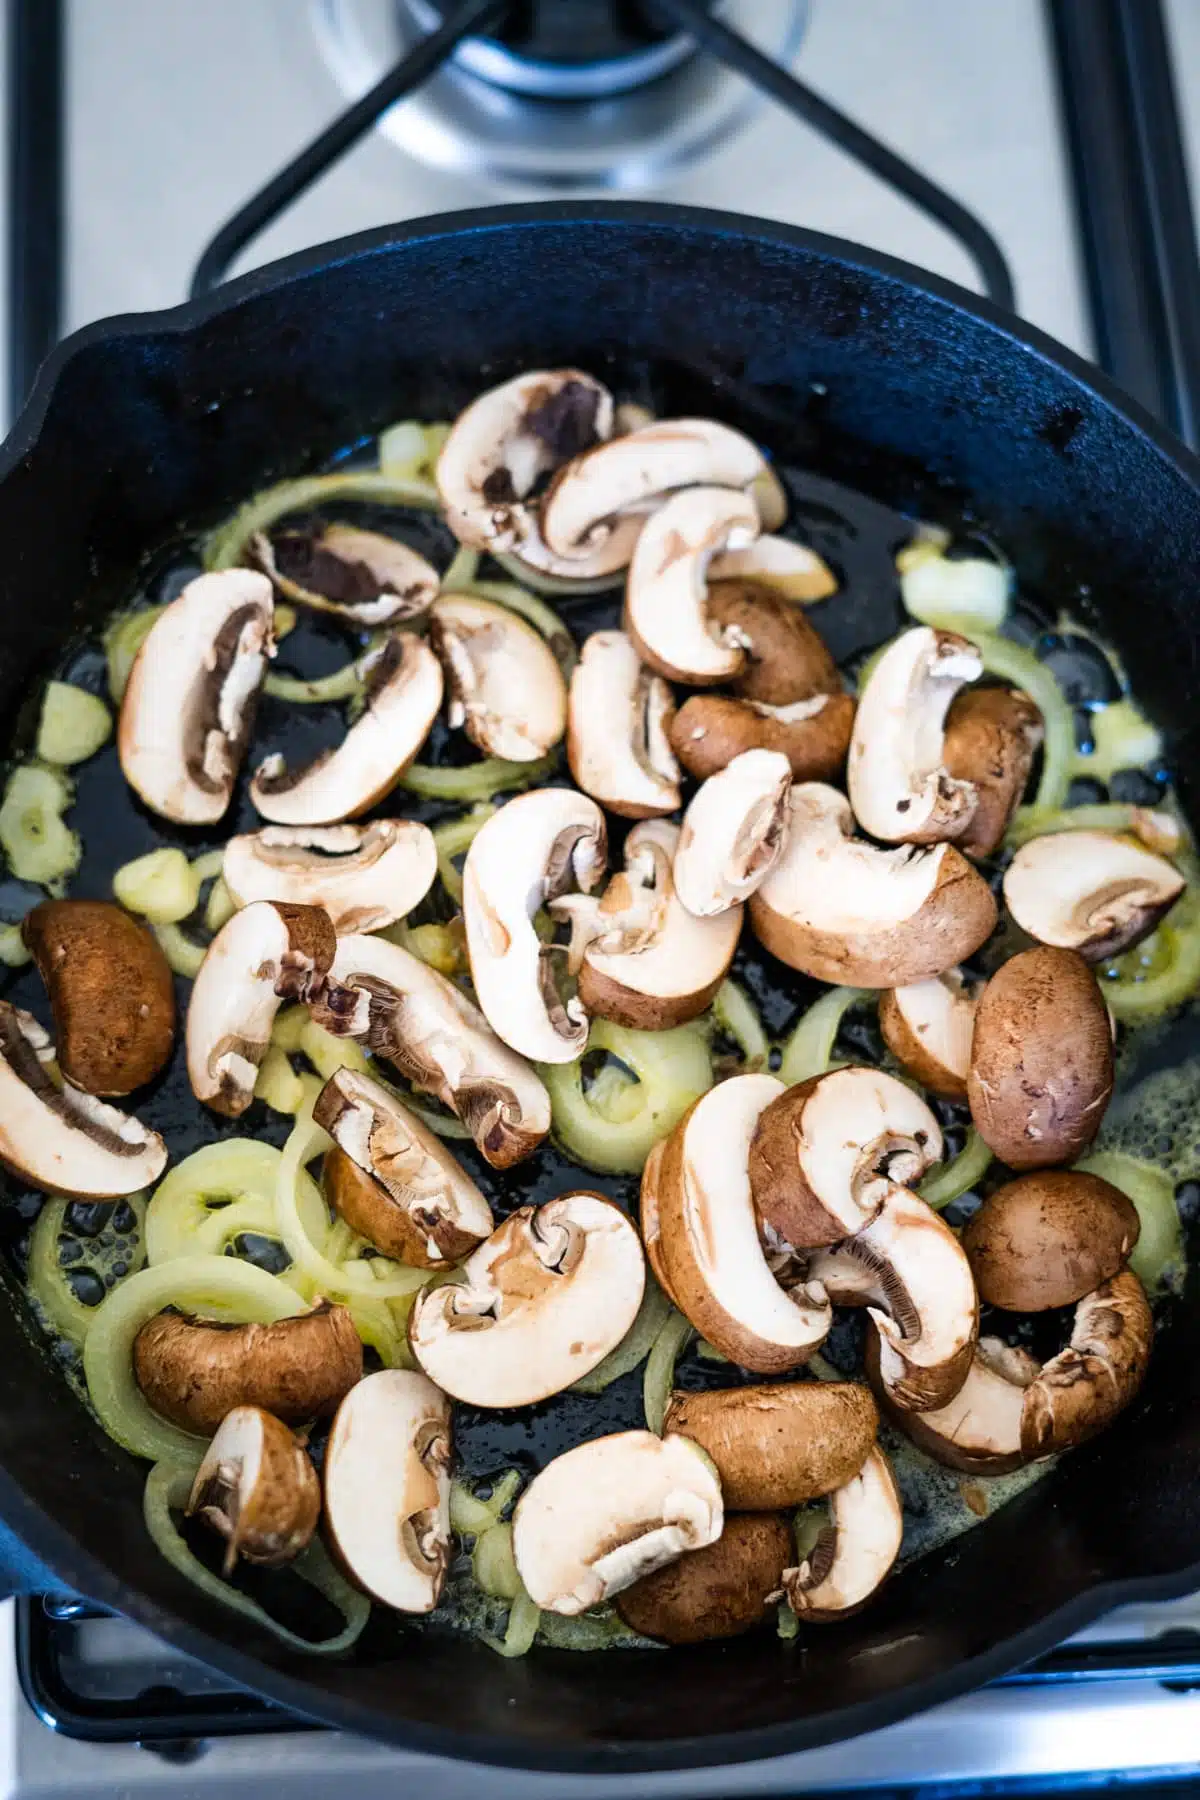 A skillet filled with mushrooms and zucchini on a stove.